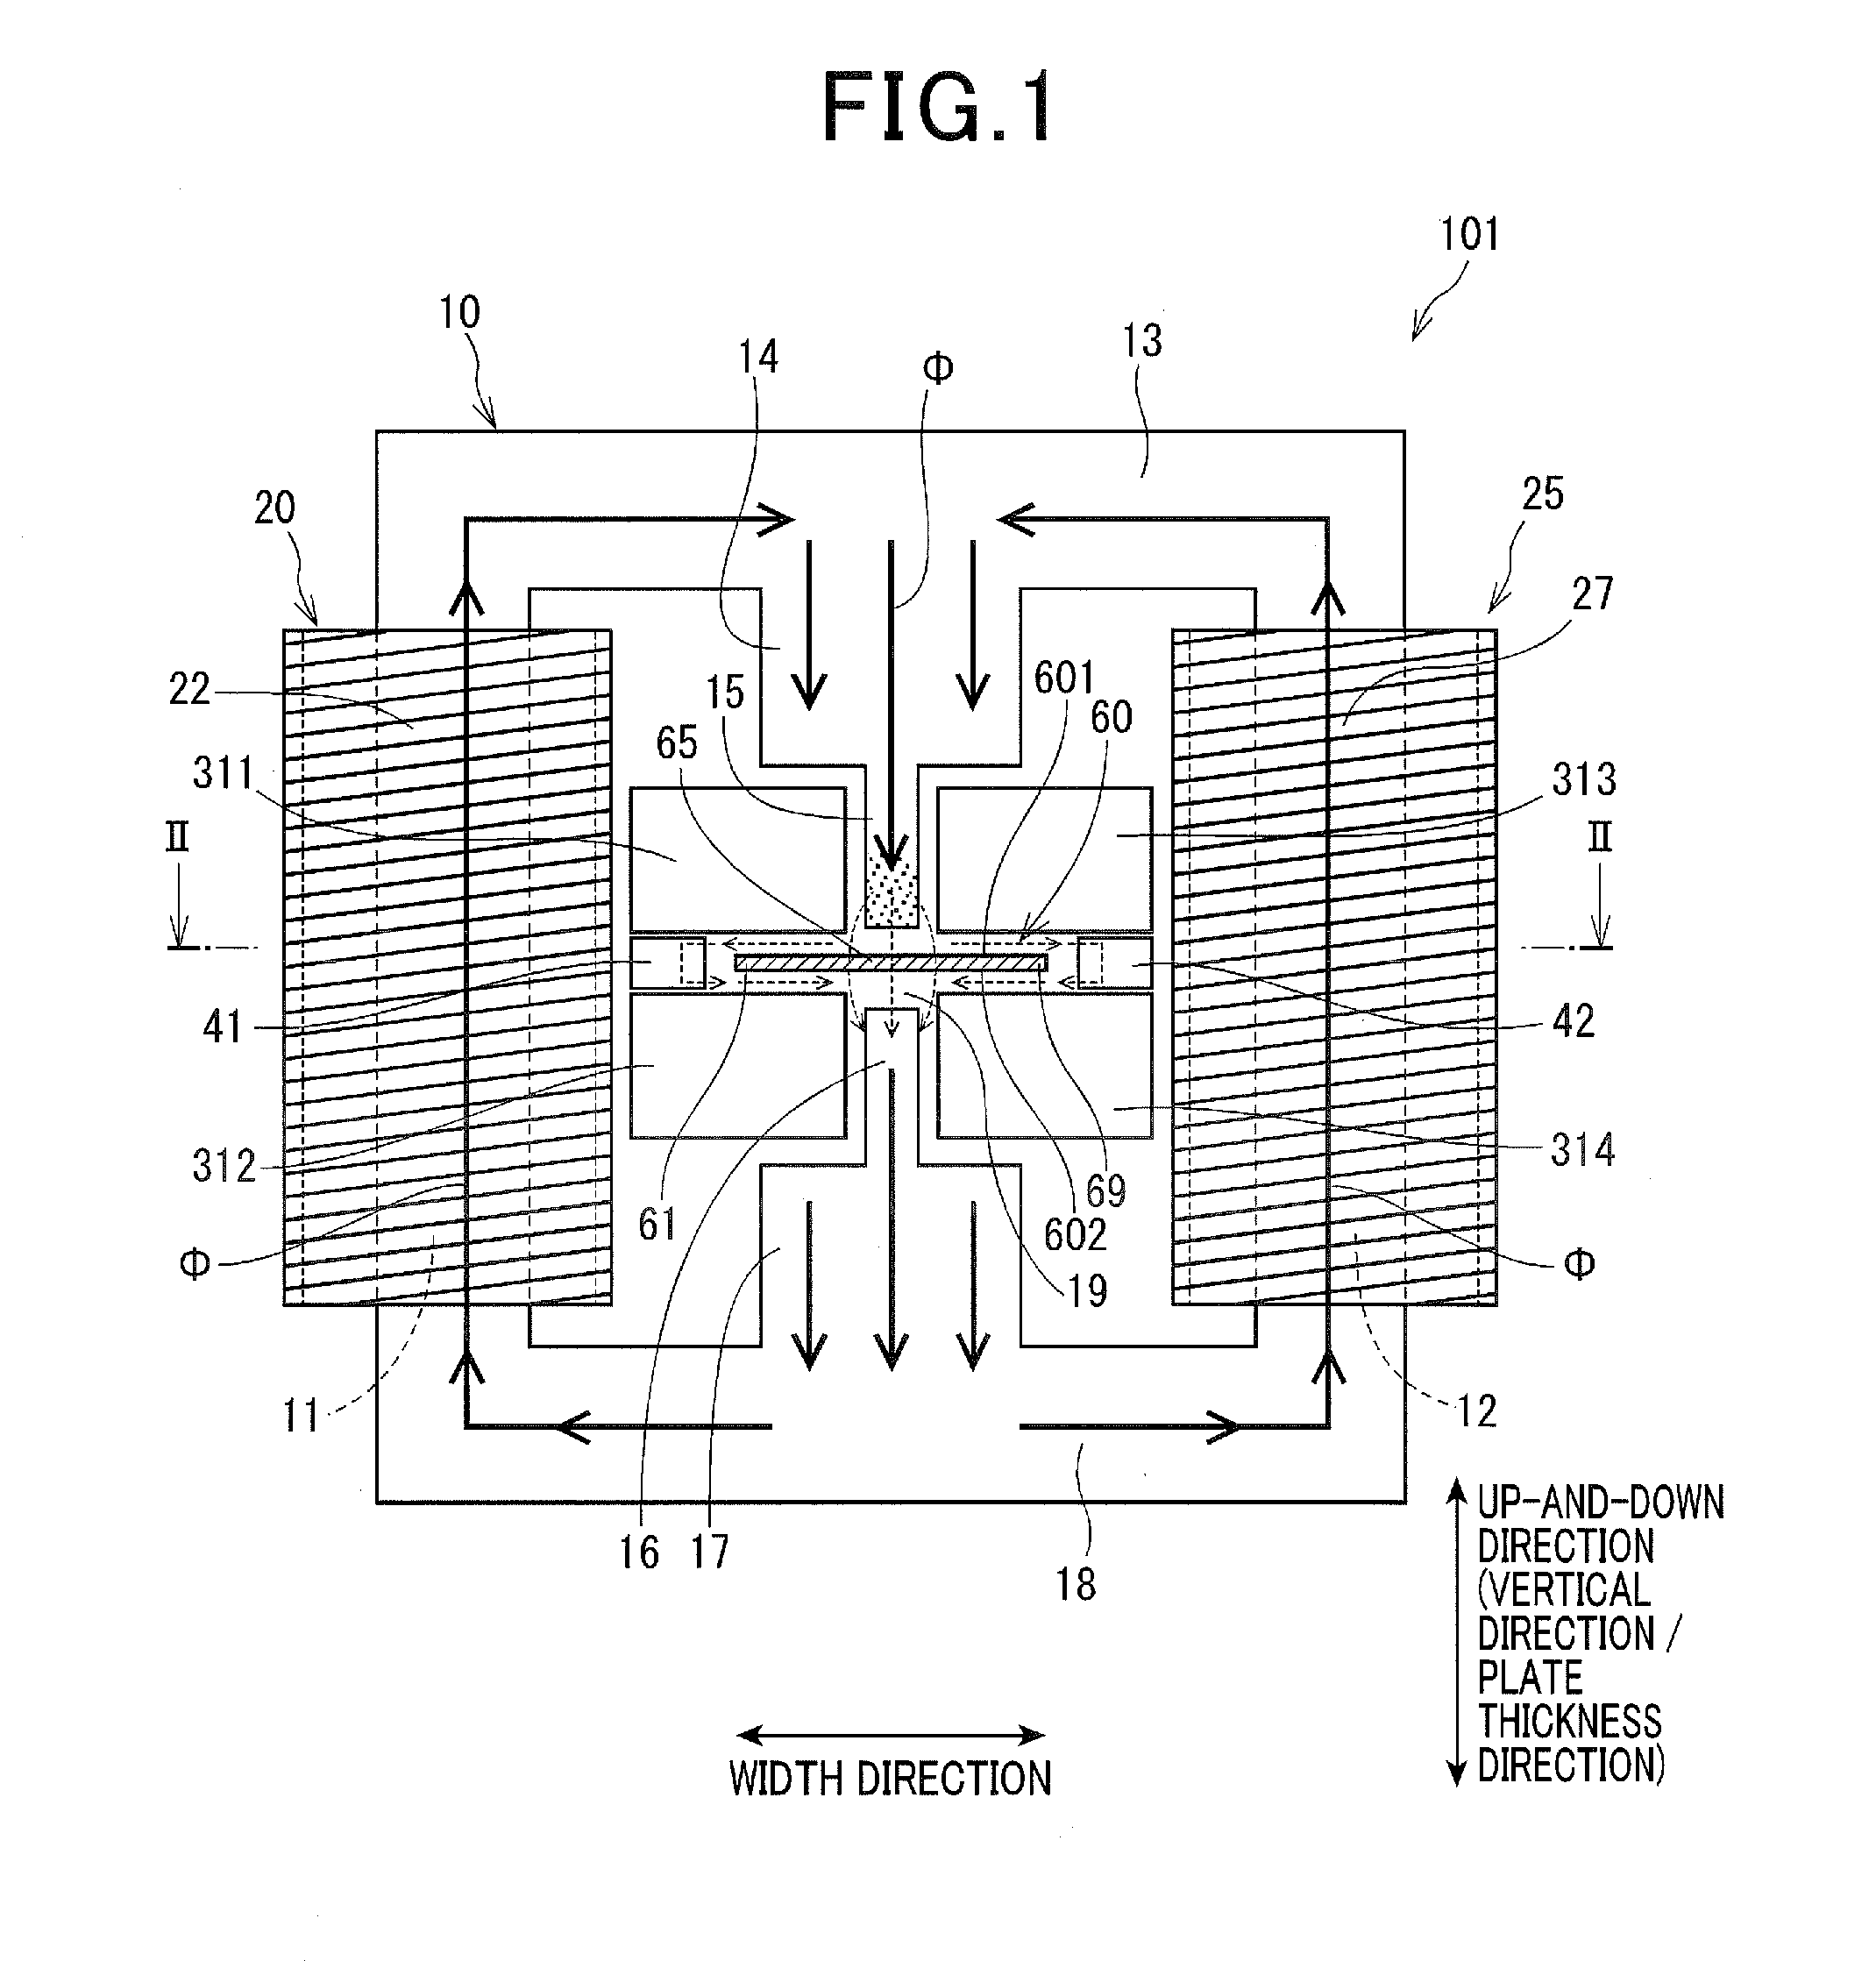 Induction heating apparatus